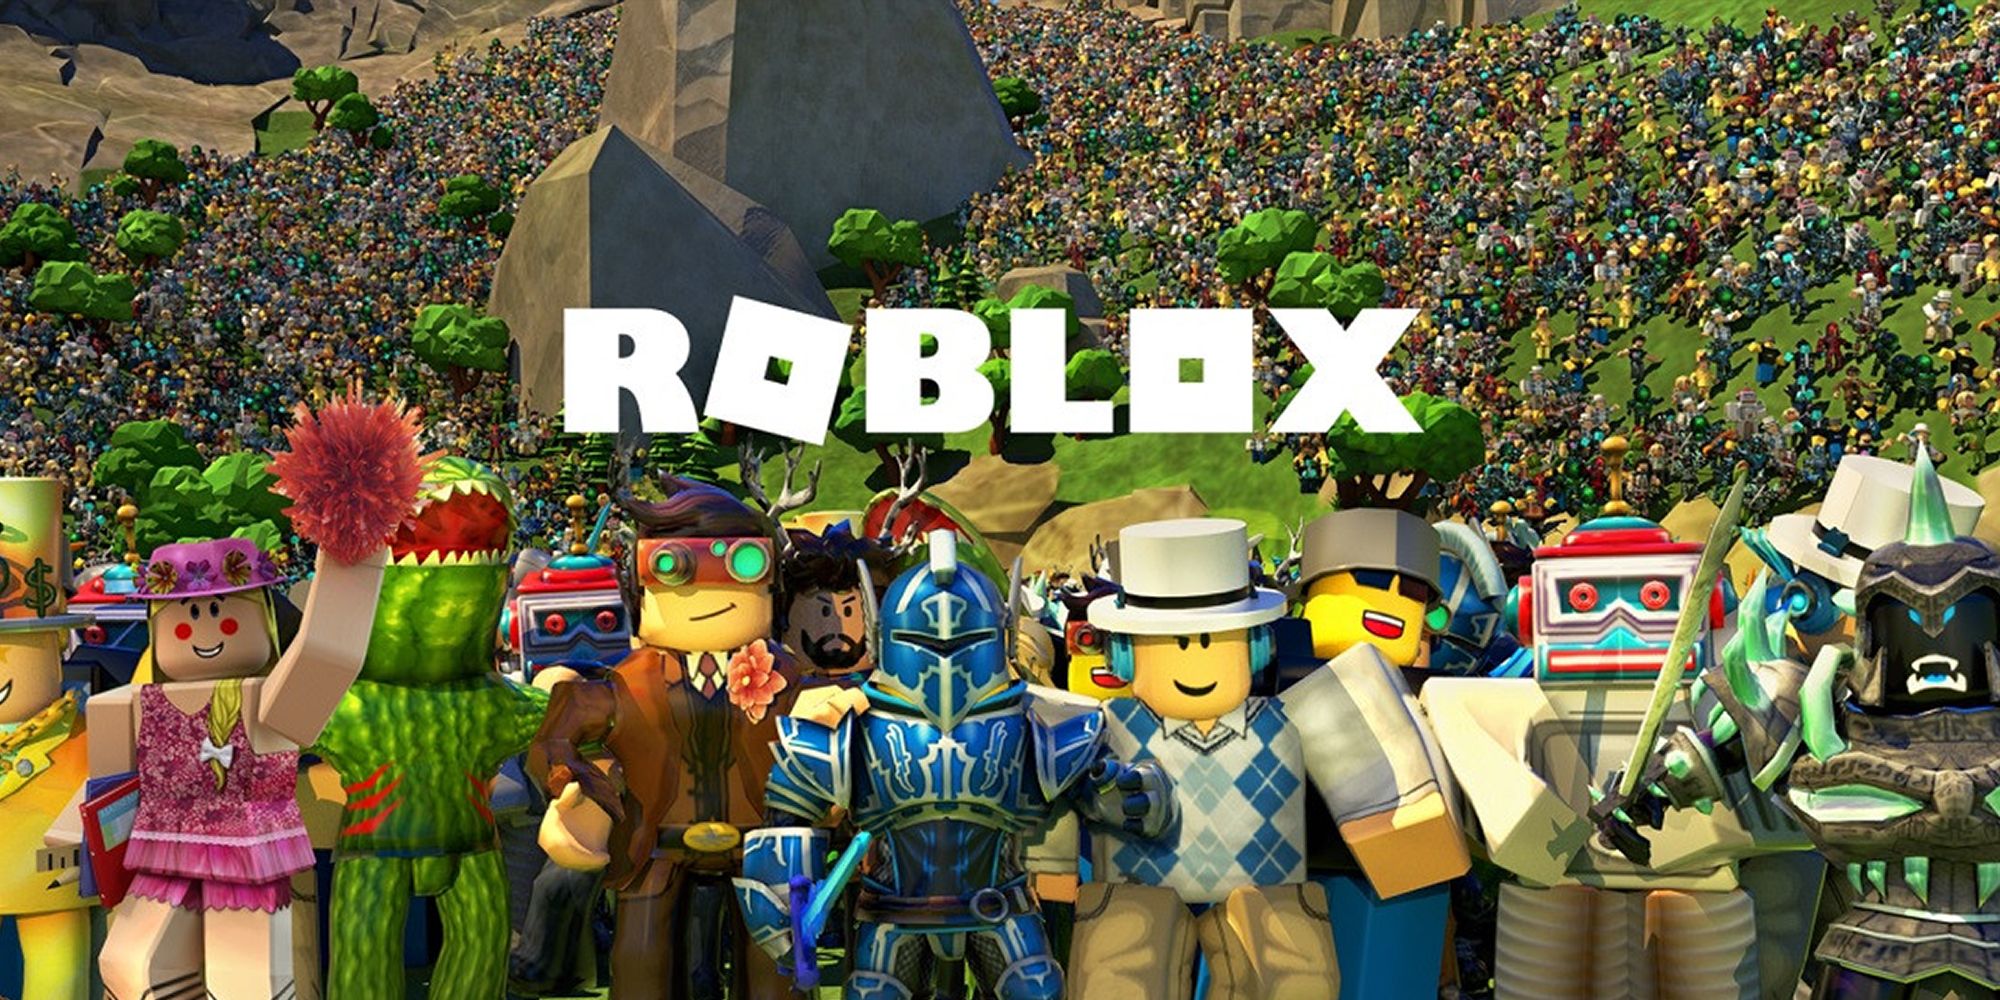 Your Reality Roblox ID - Roblox music codes